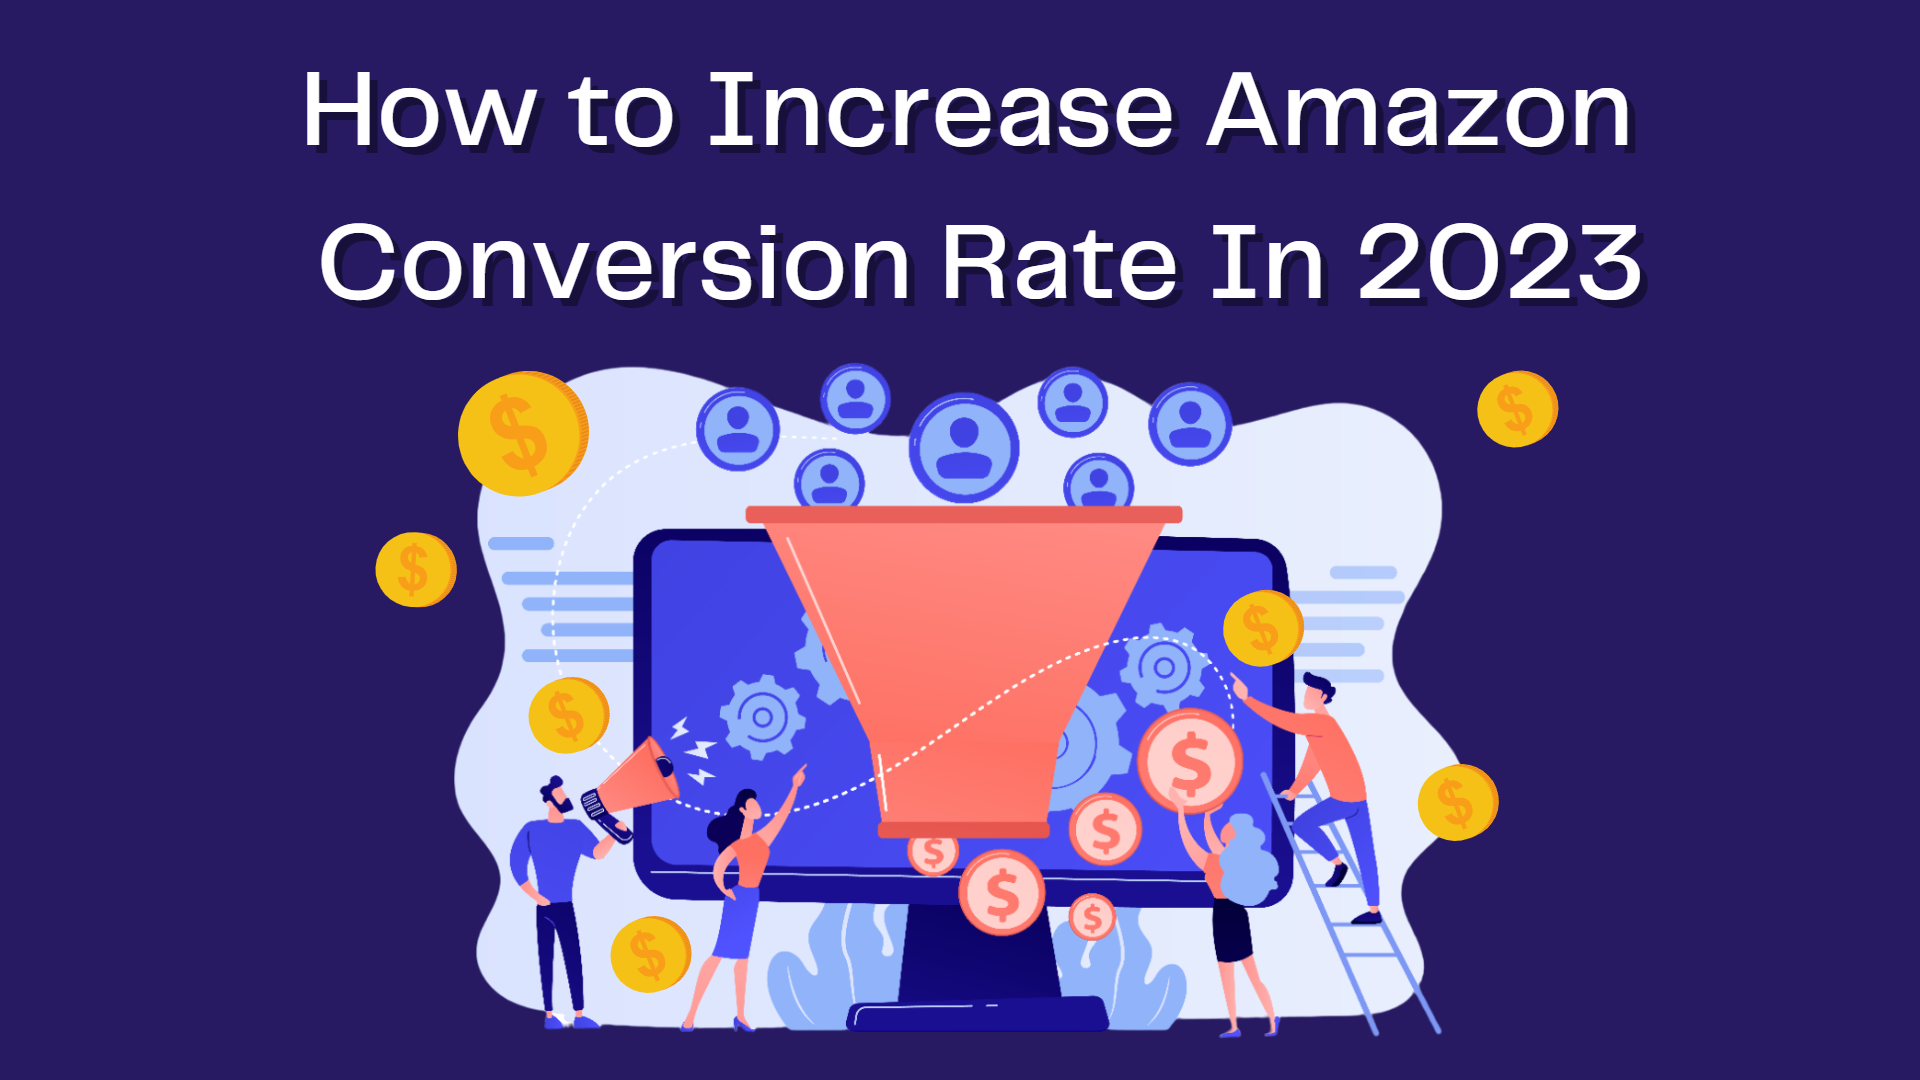 How to Increase Amazon Conversion Rate In 2023